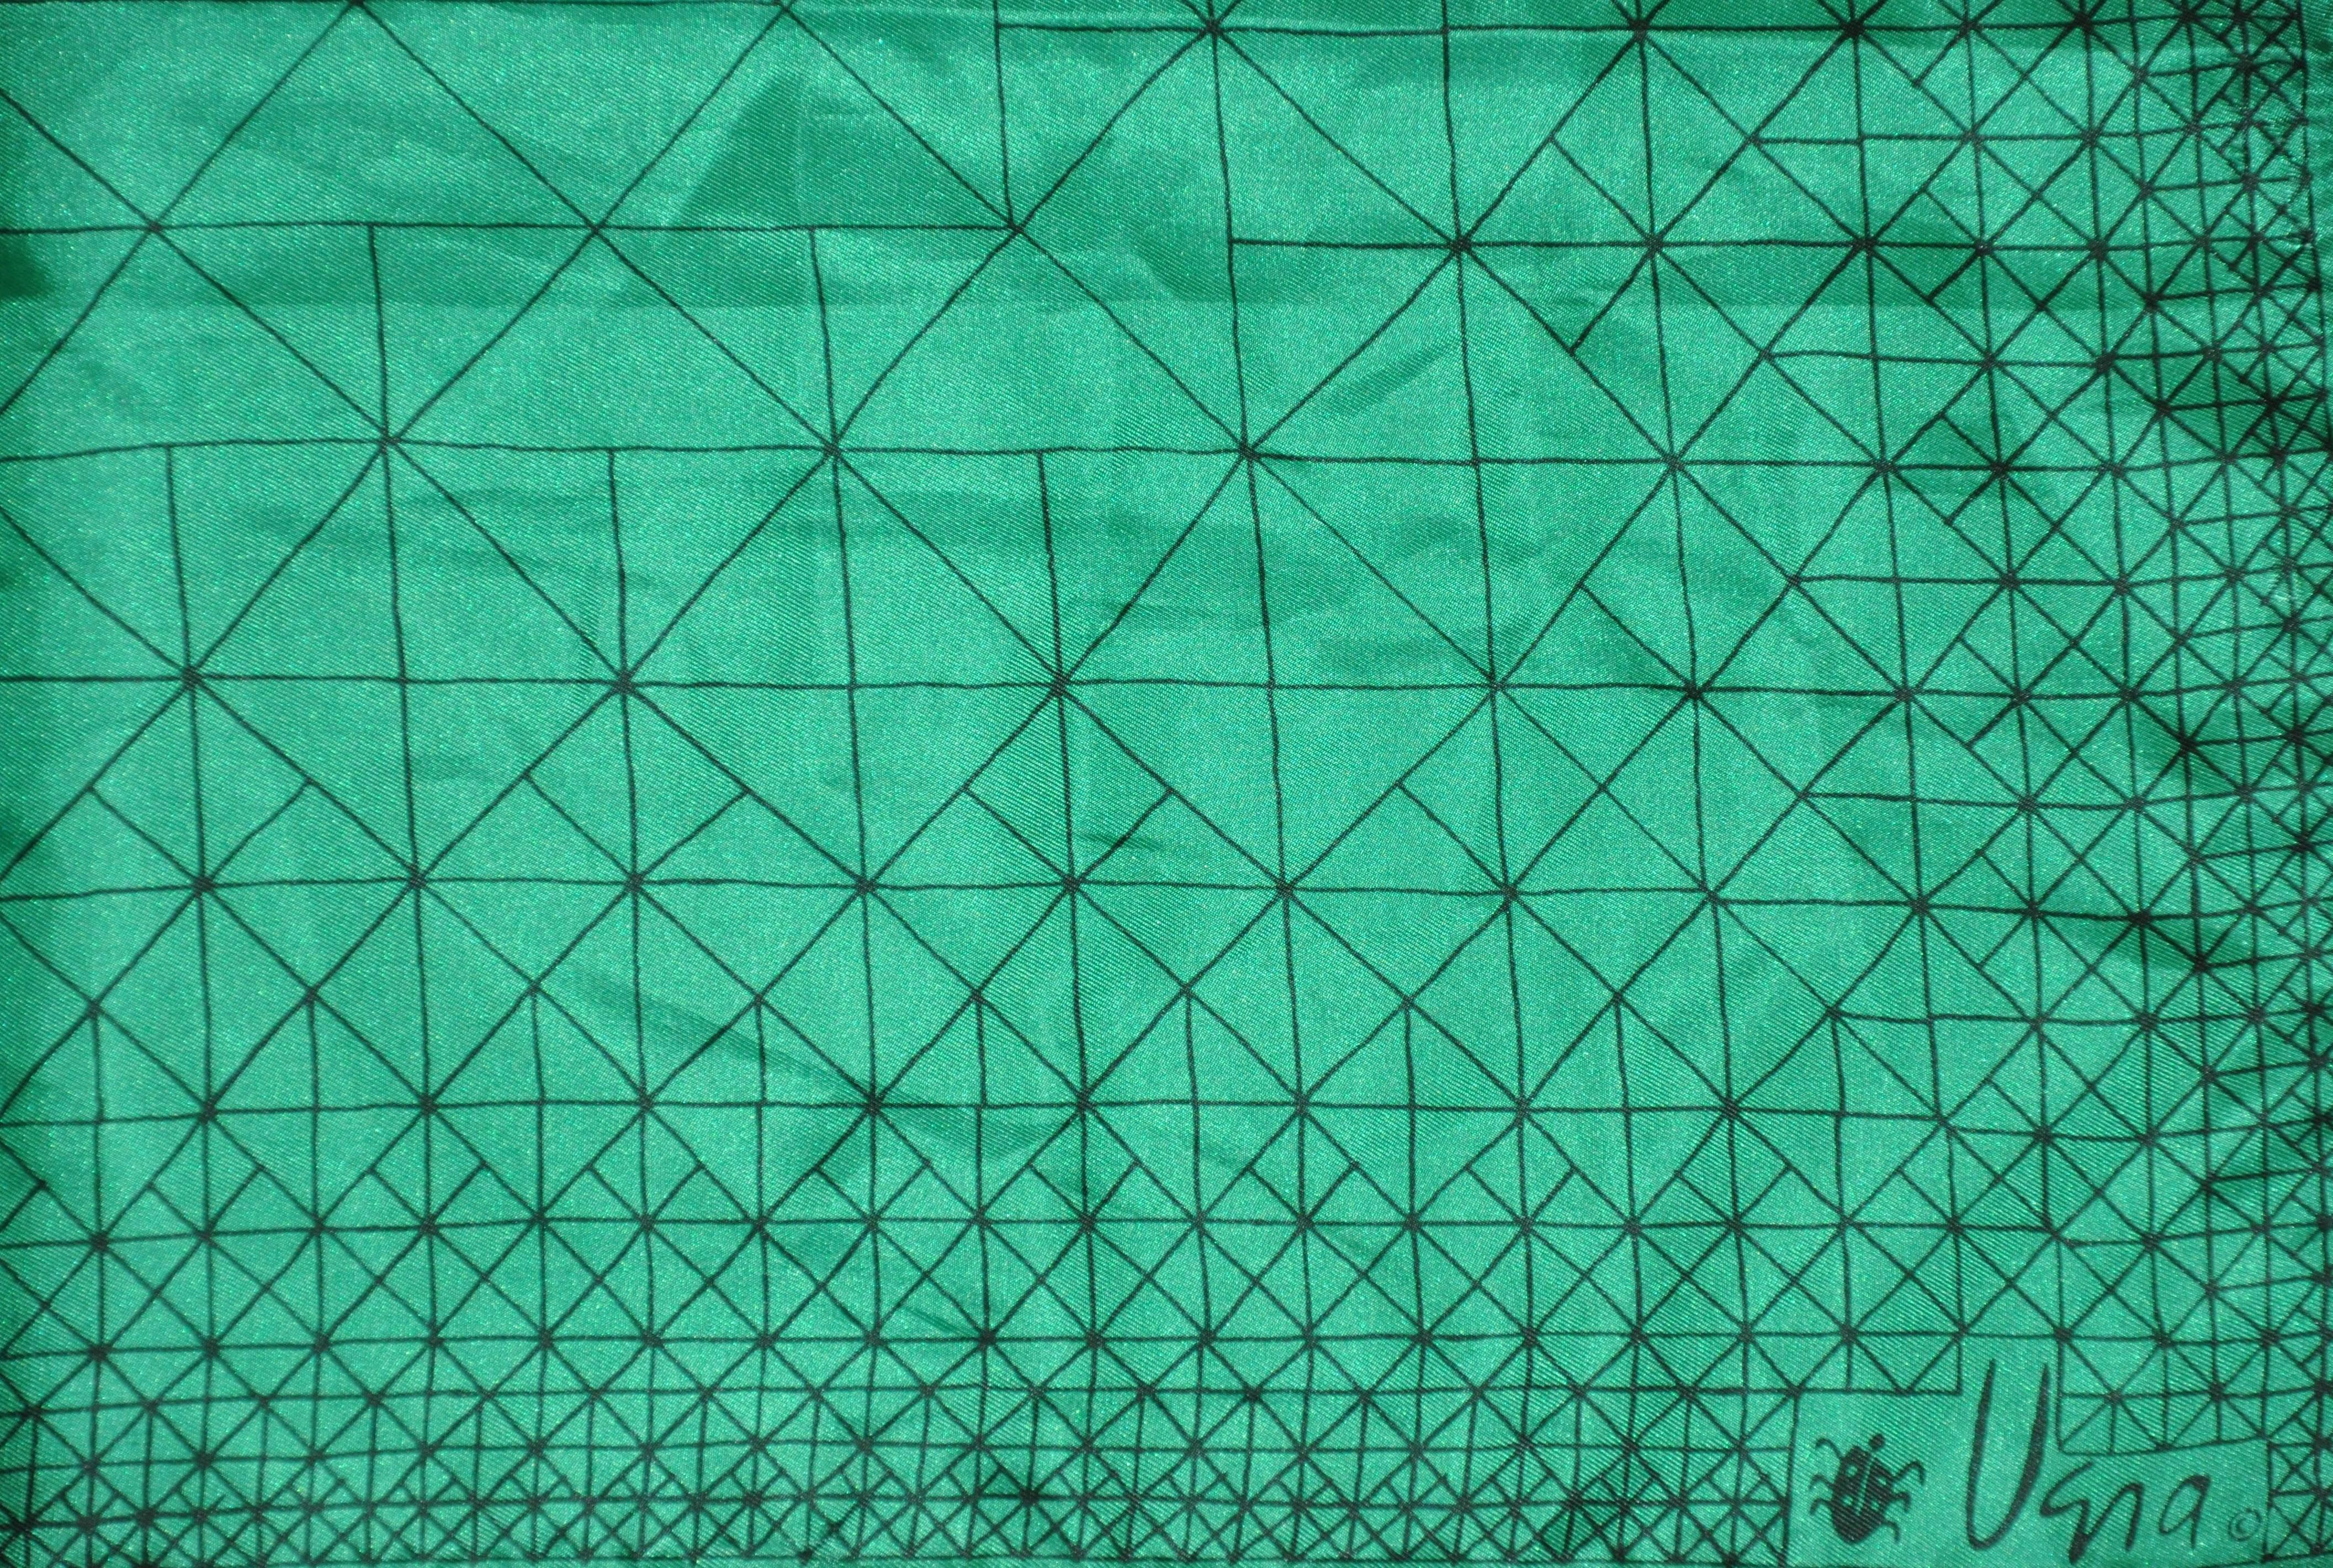        Vera emerald green with black etching throughout scarf measures 22 inches by 22 inches. Made in Japan of polyester.